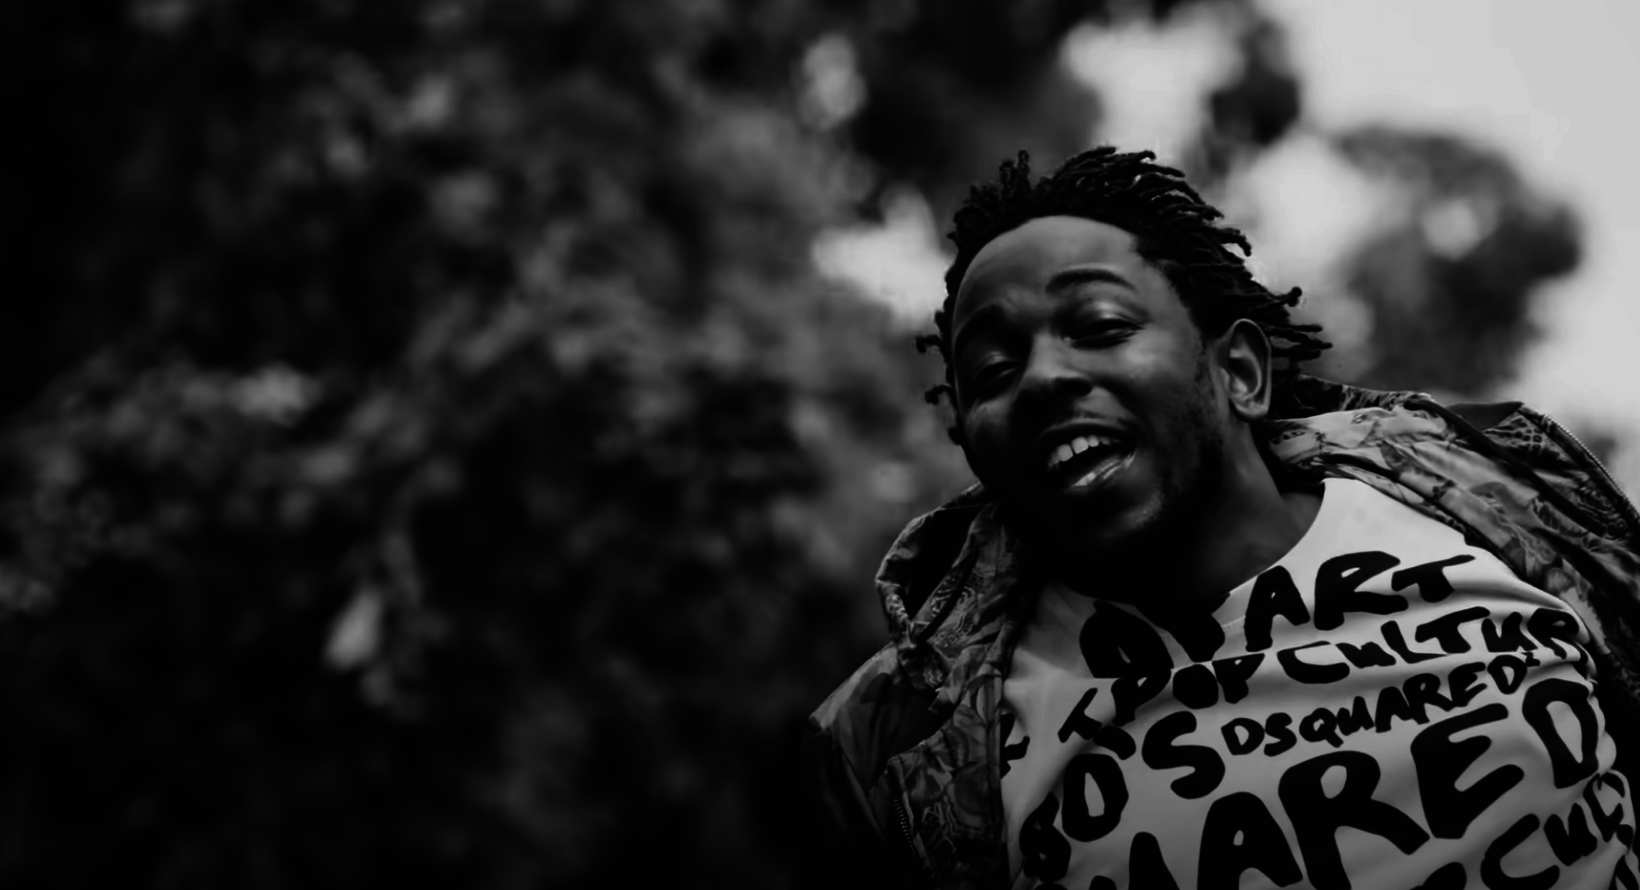 Kendrick Lamar in the &quot;Alright&quot; music video